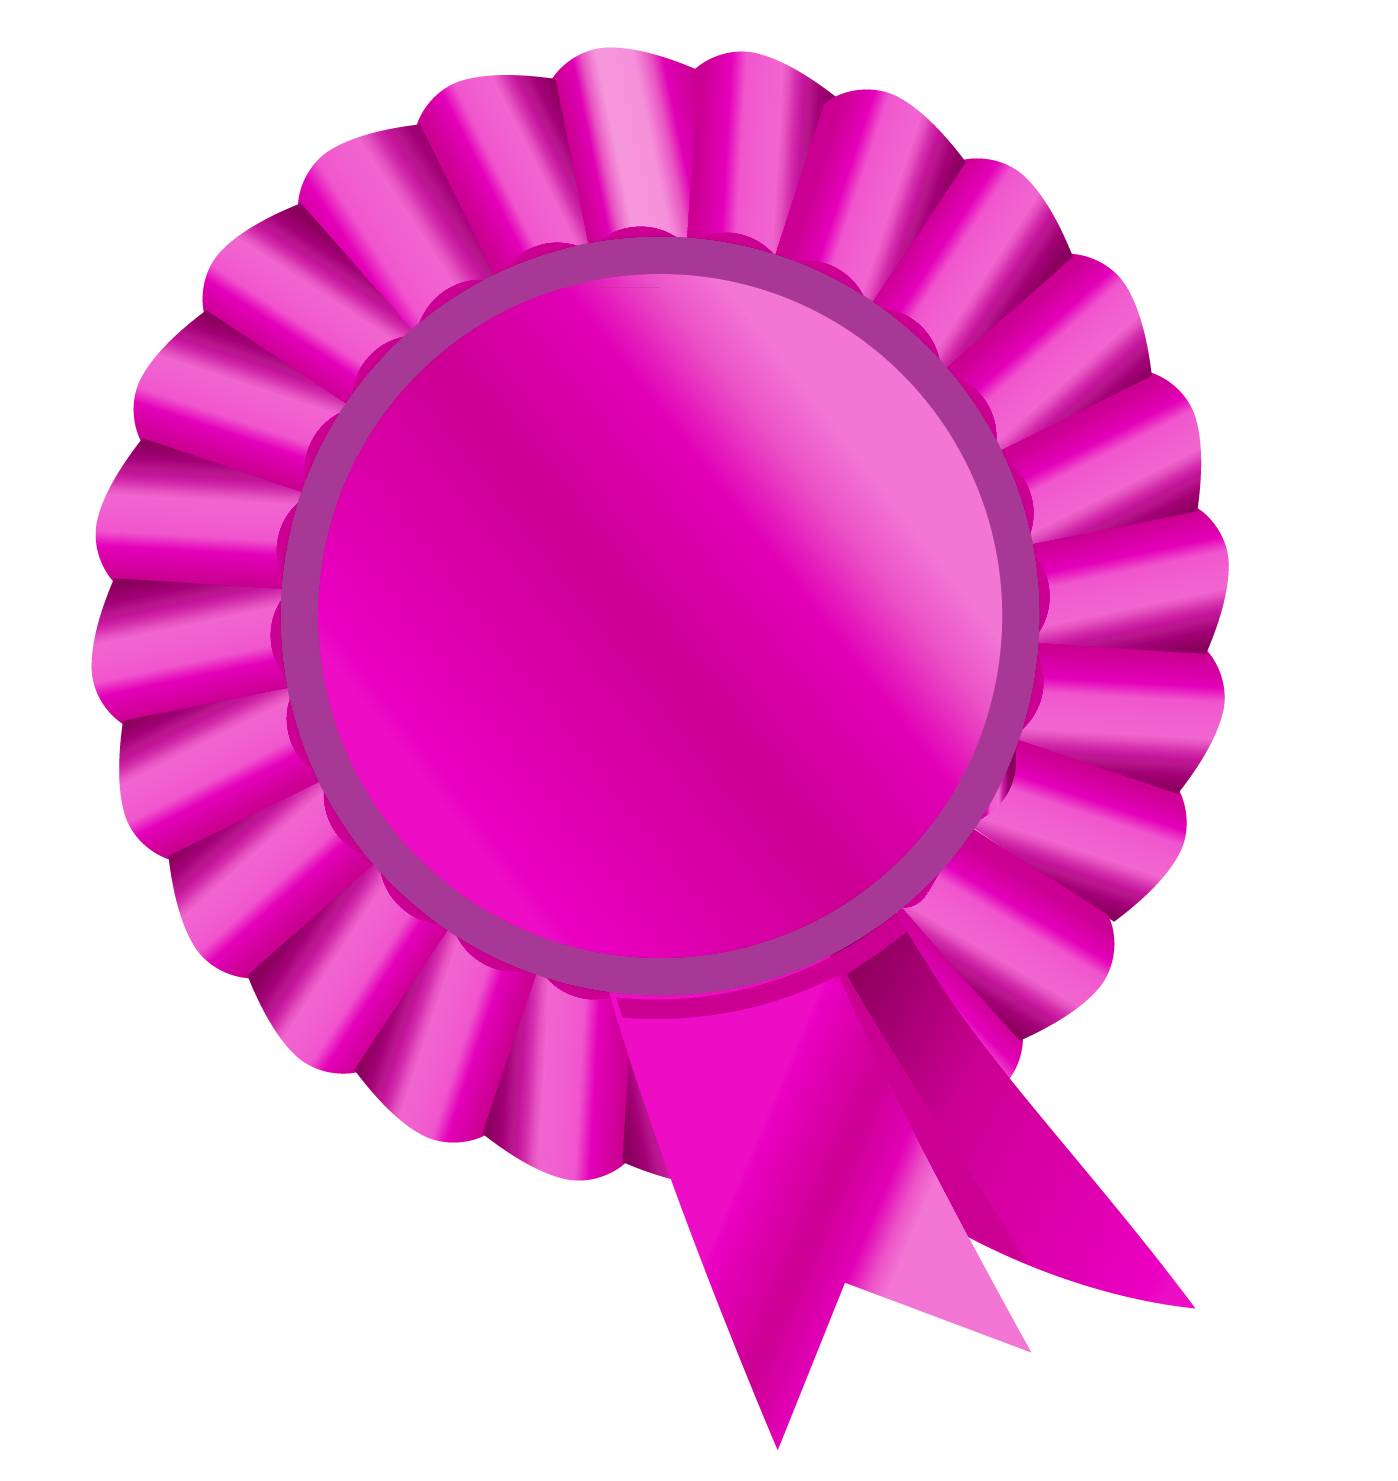 Rosette Ribbon Pink Clipart Picture